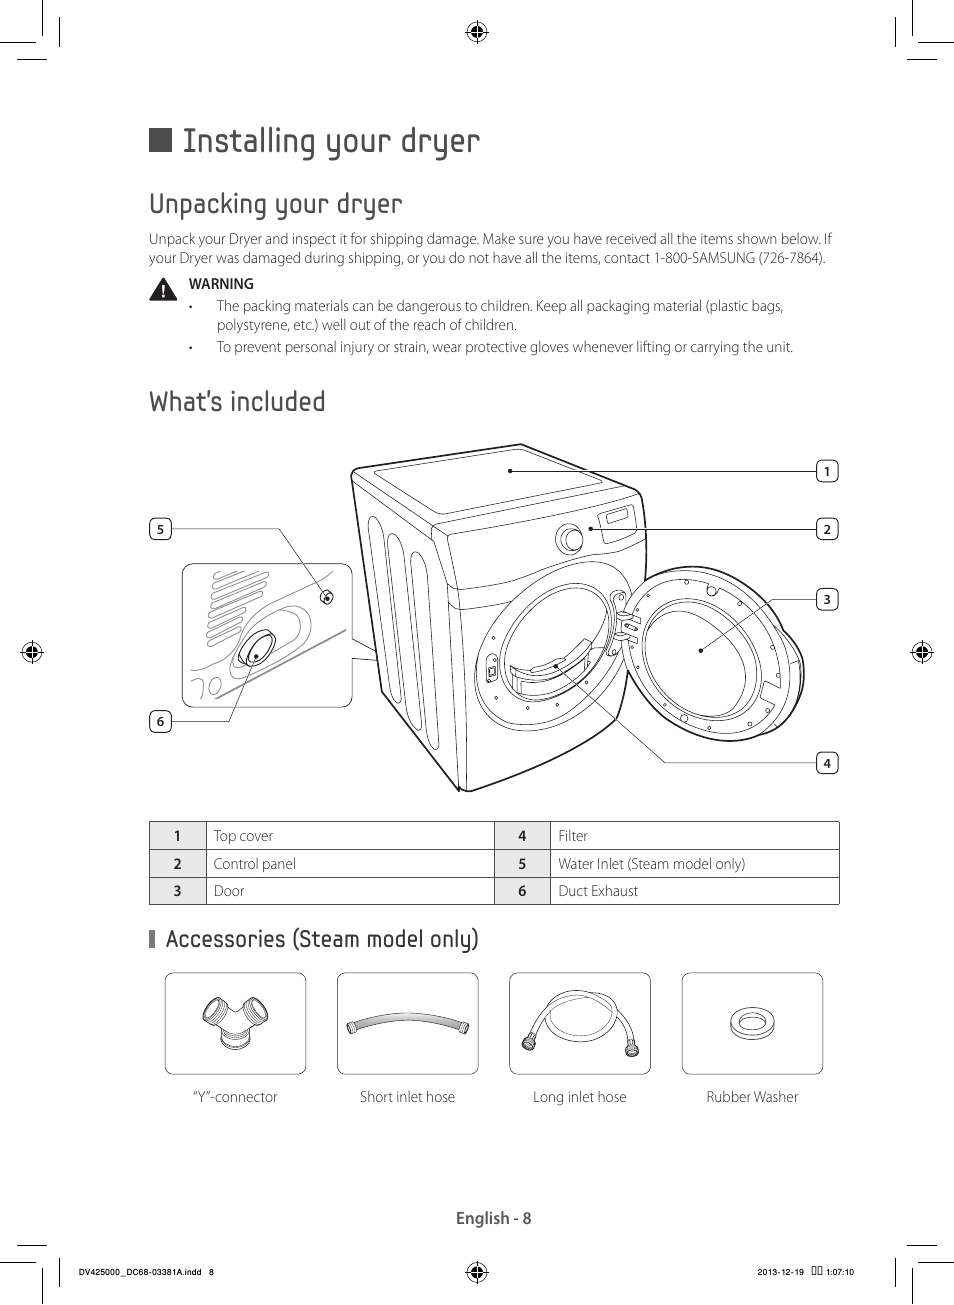 Installing your dryer, Unpacking your dryer, What’s included | Samsung